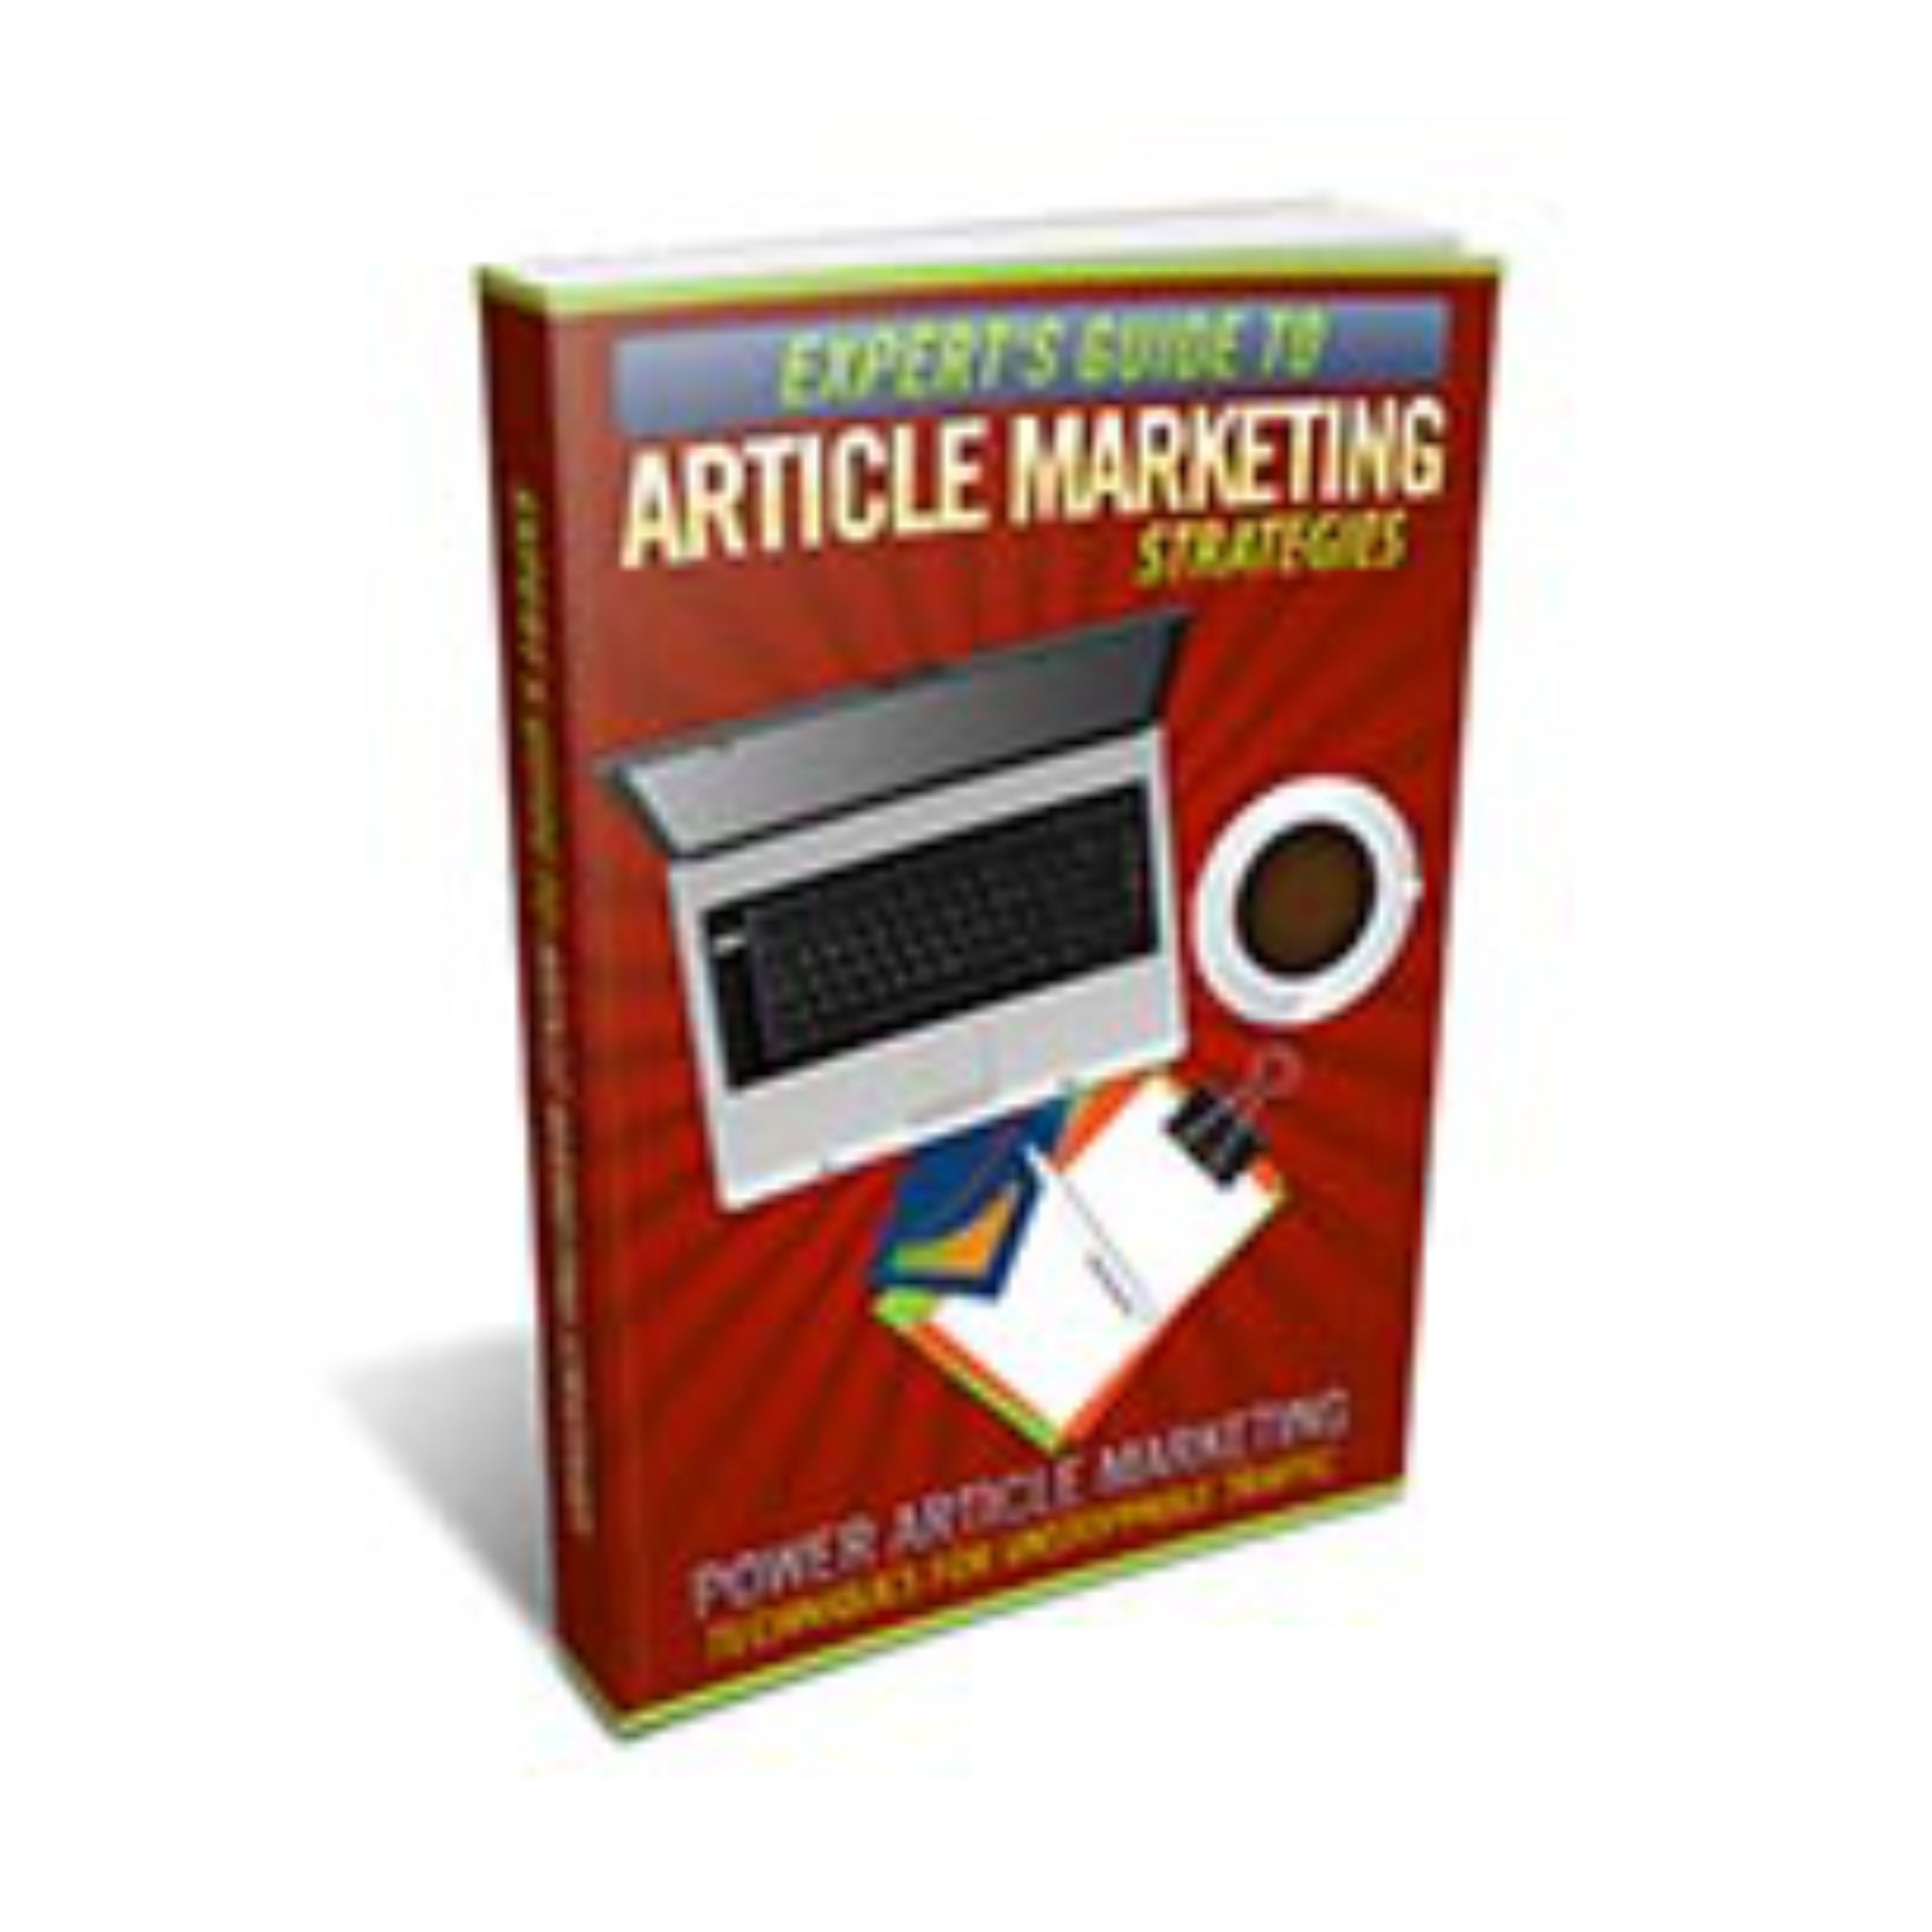 Experts Guide To Article Marketing Strategies Ebook